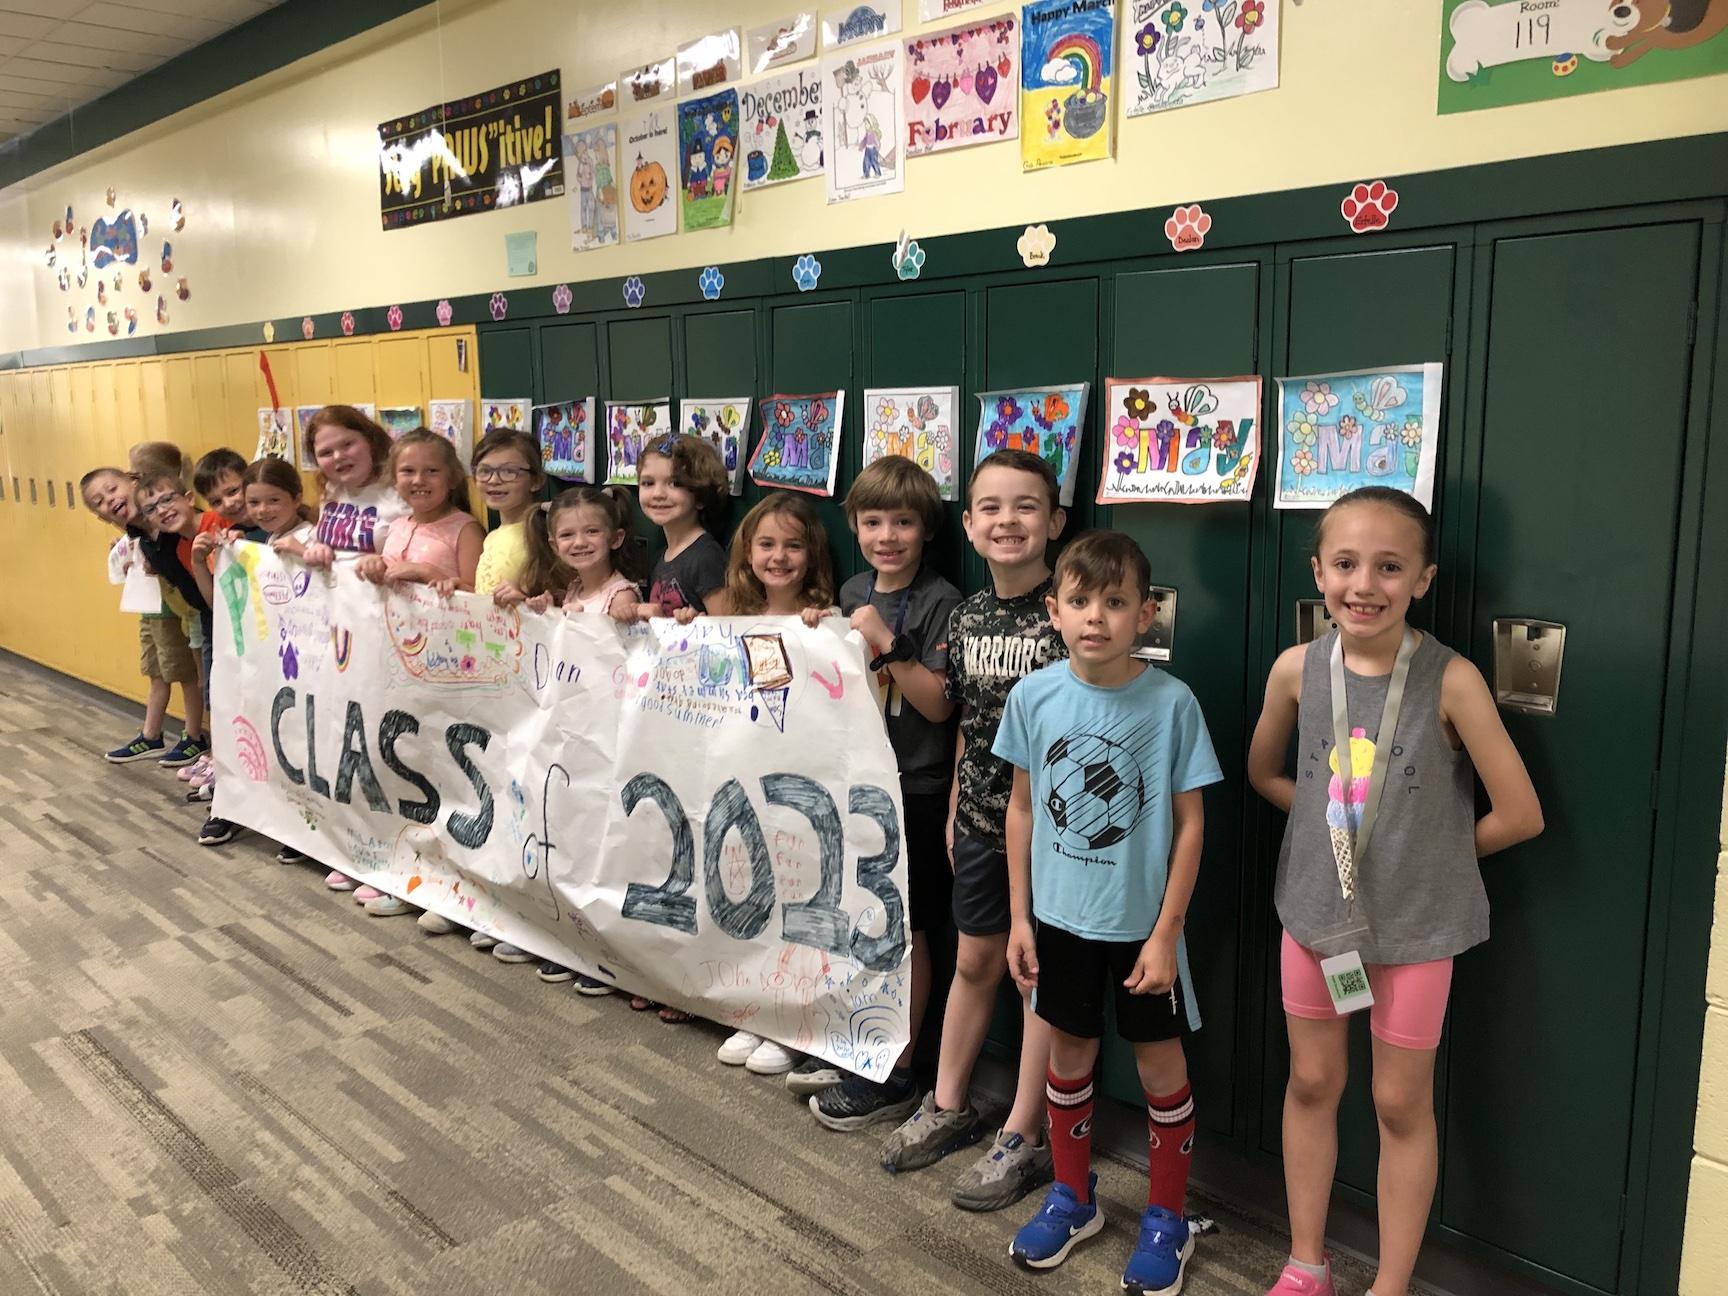 Trafford Elementary students are ready to greet the Seniors